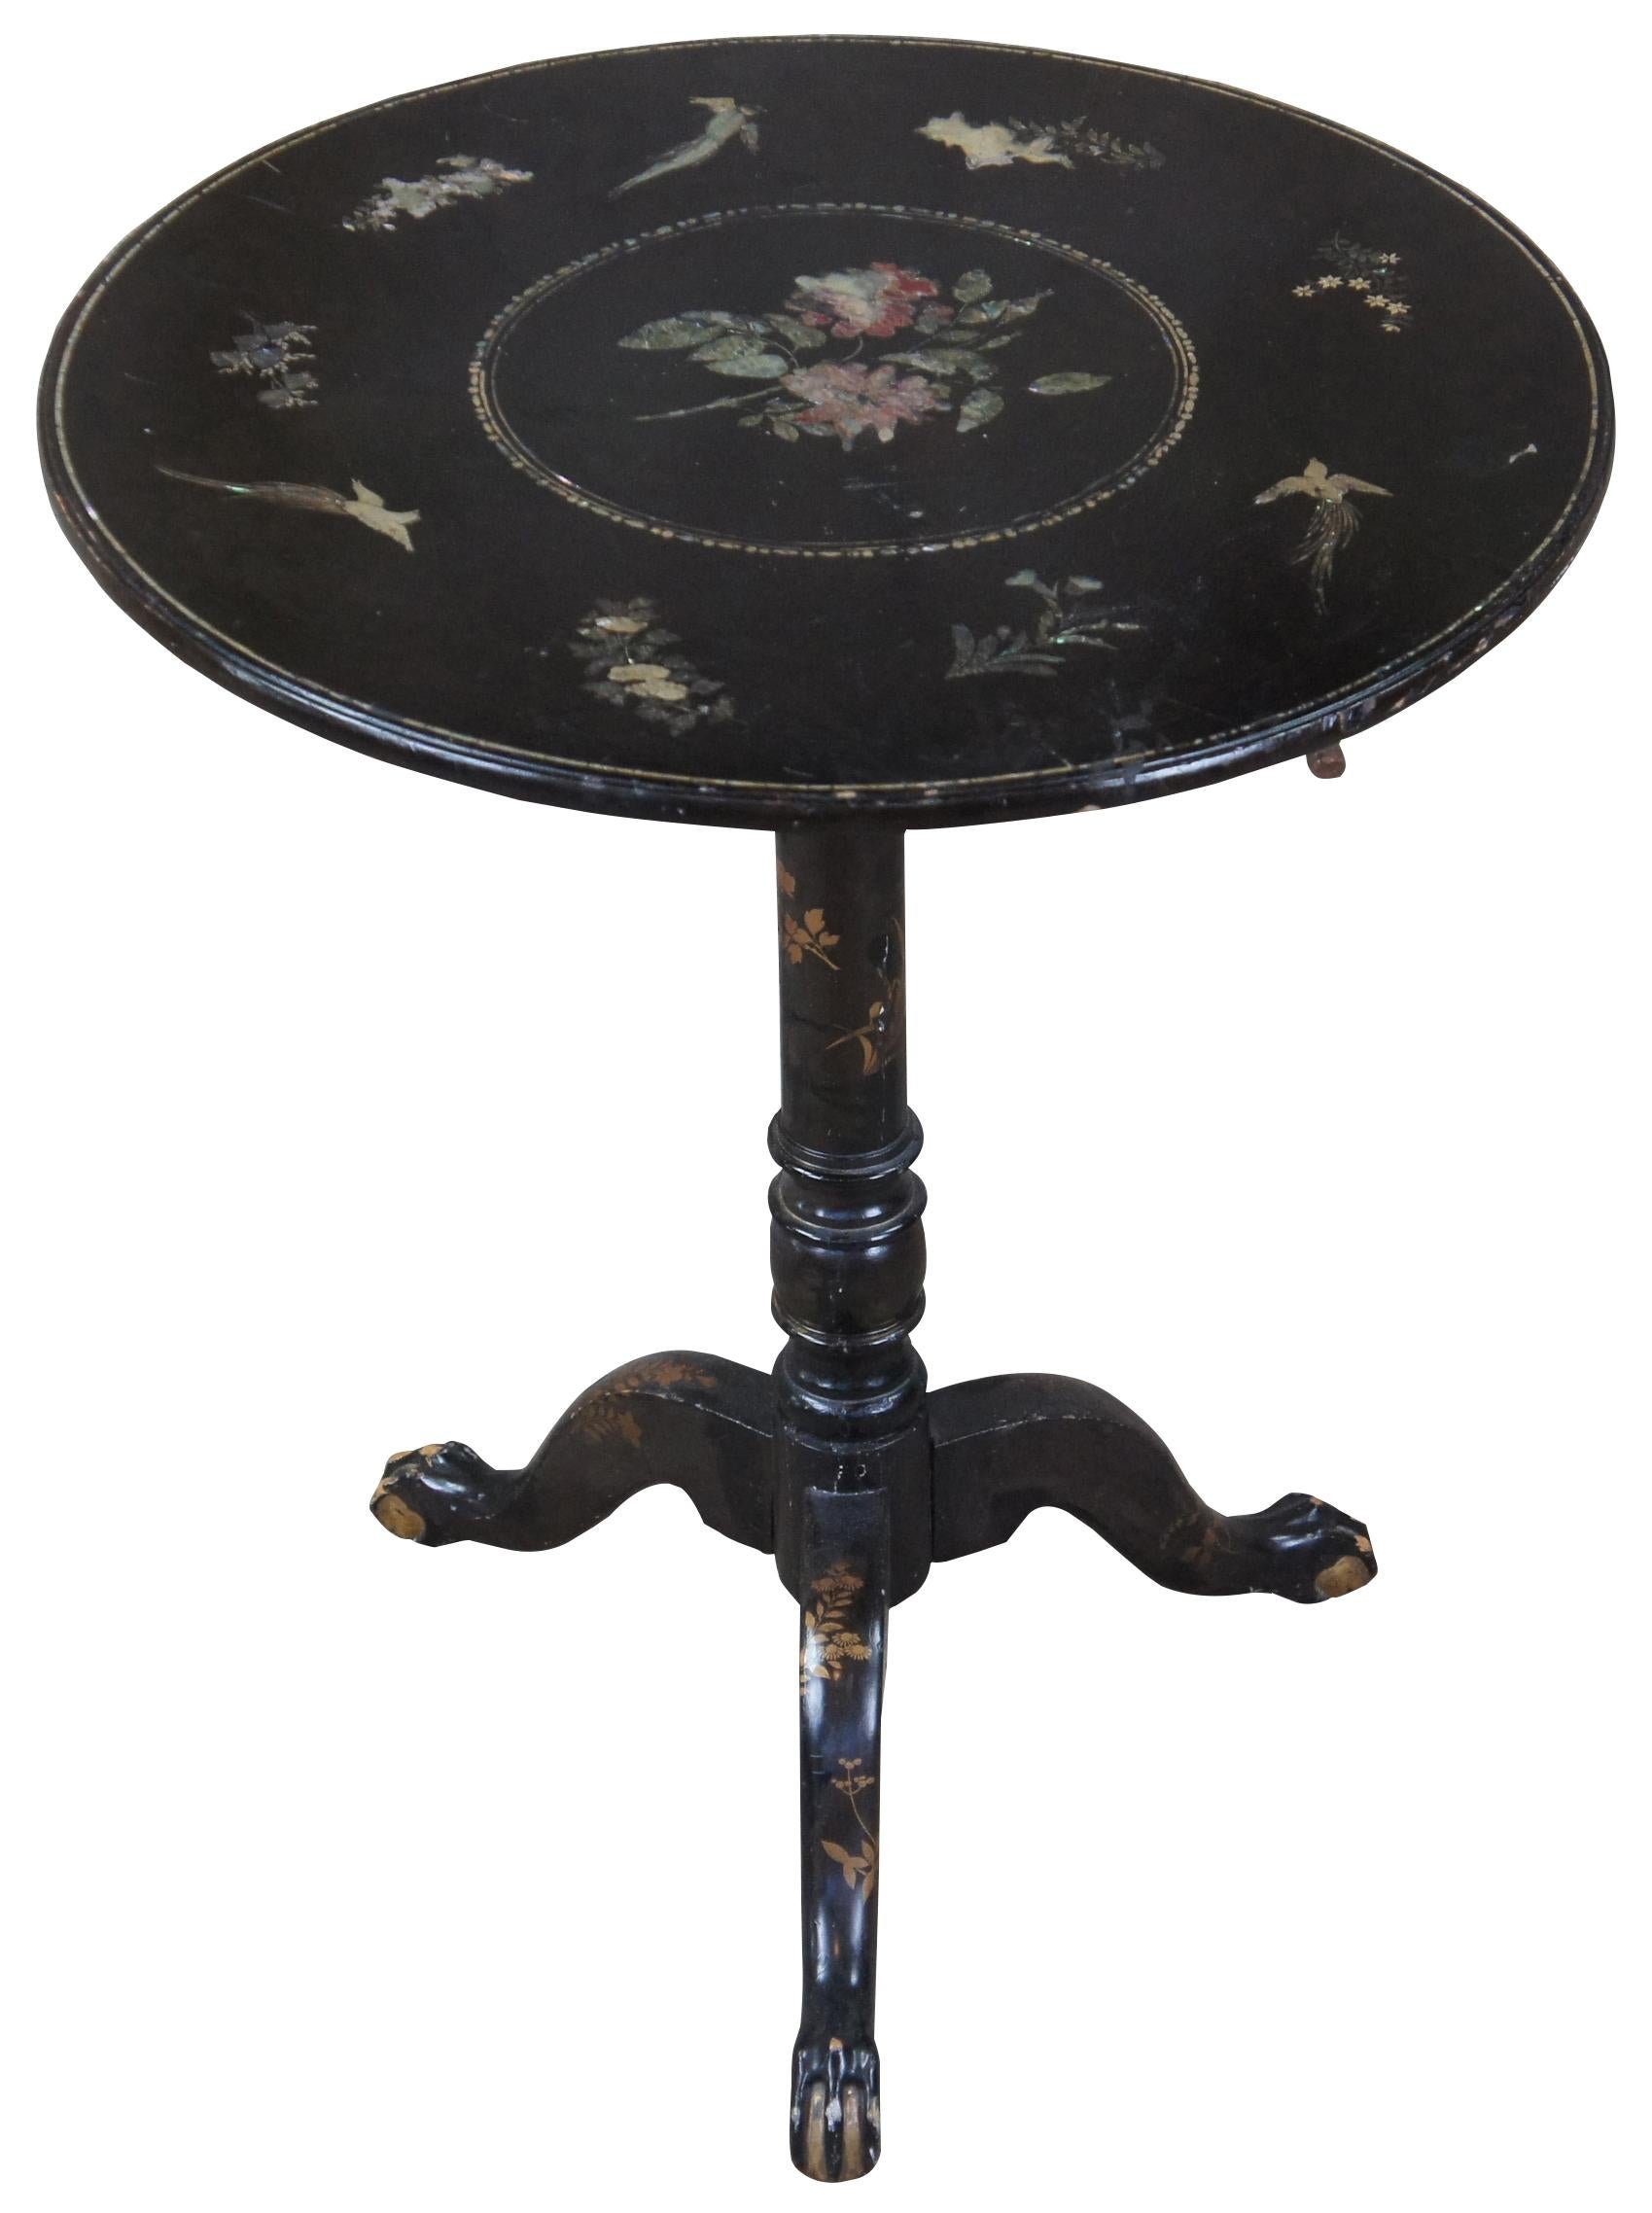 A Victorian inlaid lacquer tea table in the manner of Chippendale style, Circa19th century. Features a circular top with bird and flower inlay, raised on a tripod base with gilt accents and ball and claw feet.

Provenance: Estate of Carol Levitan